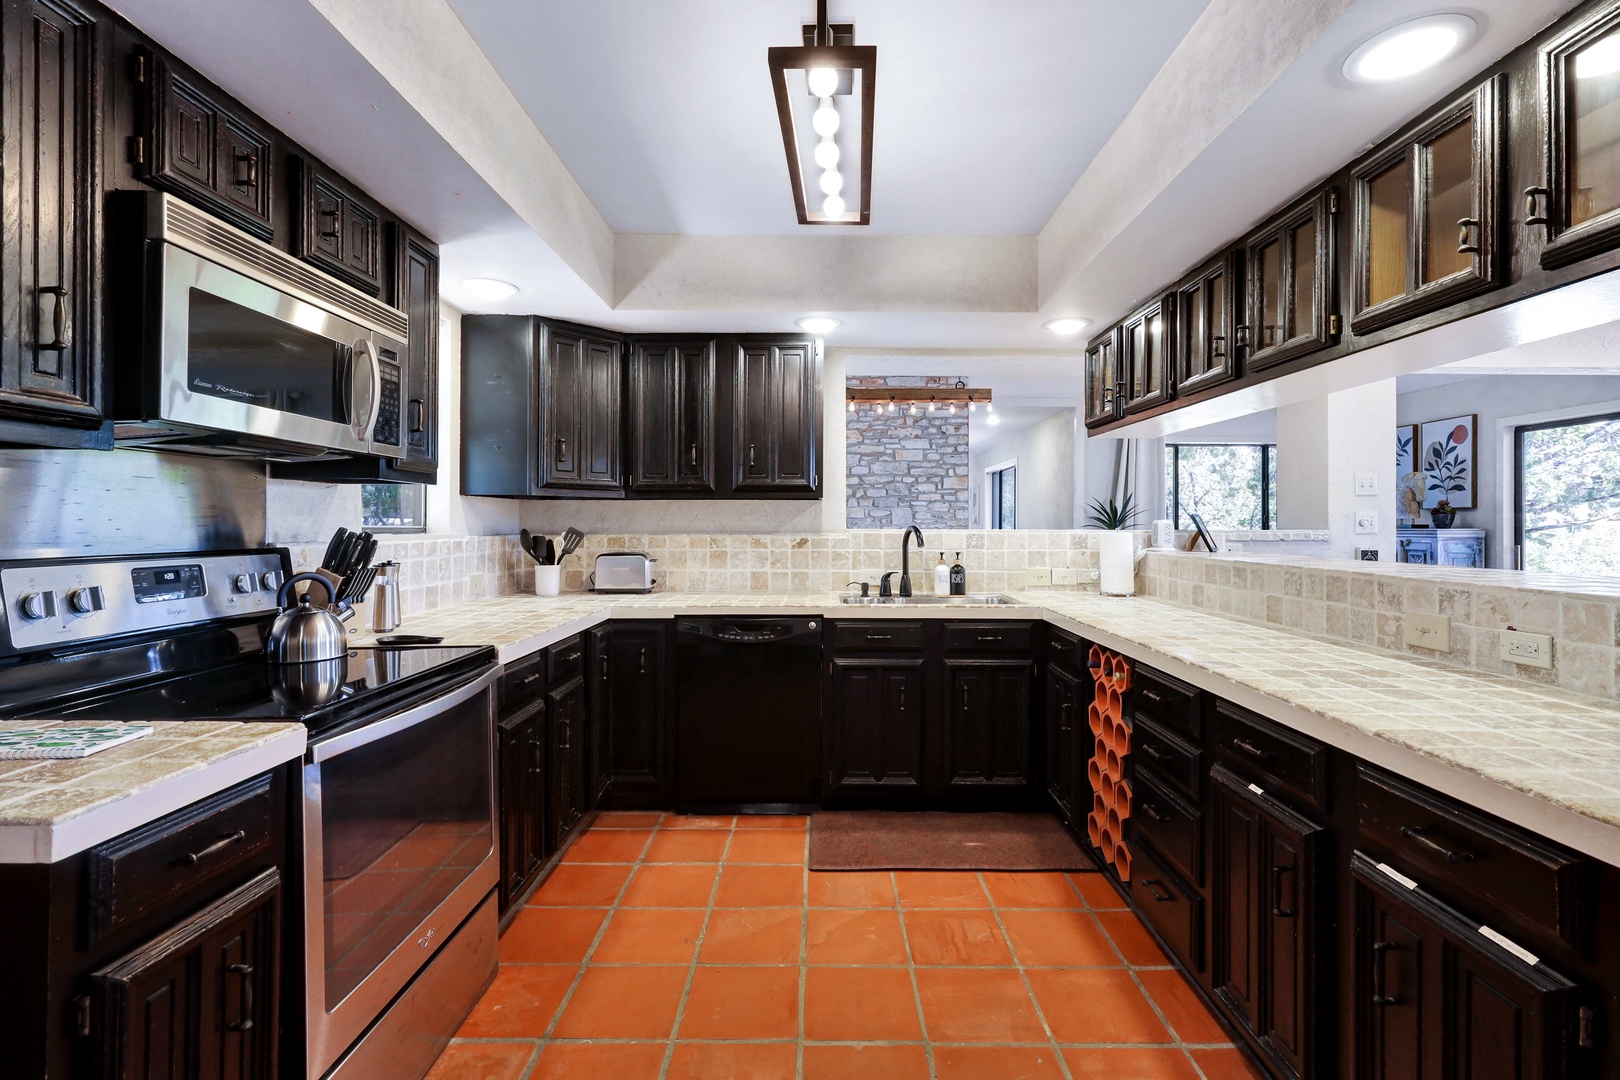 The sleek, open kitchen offers ample space & all the comforts of home